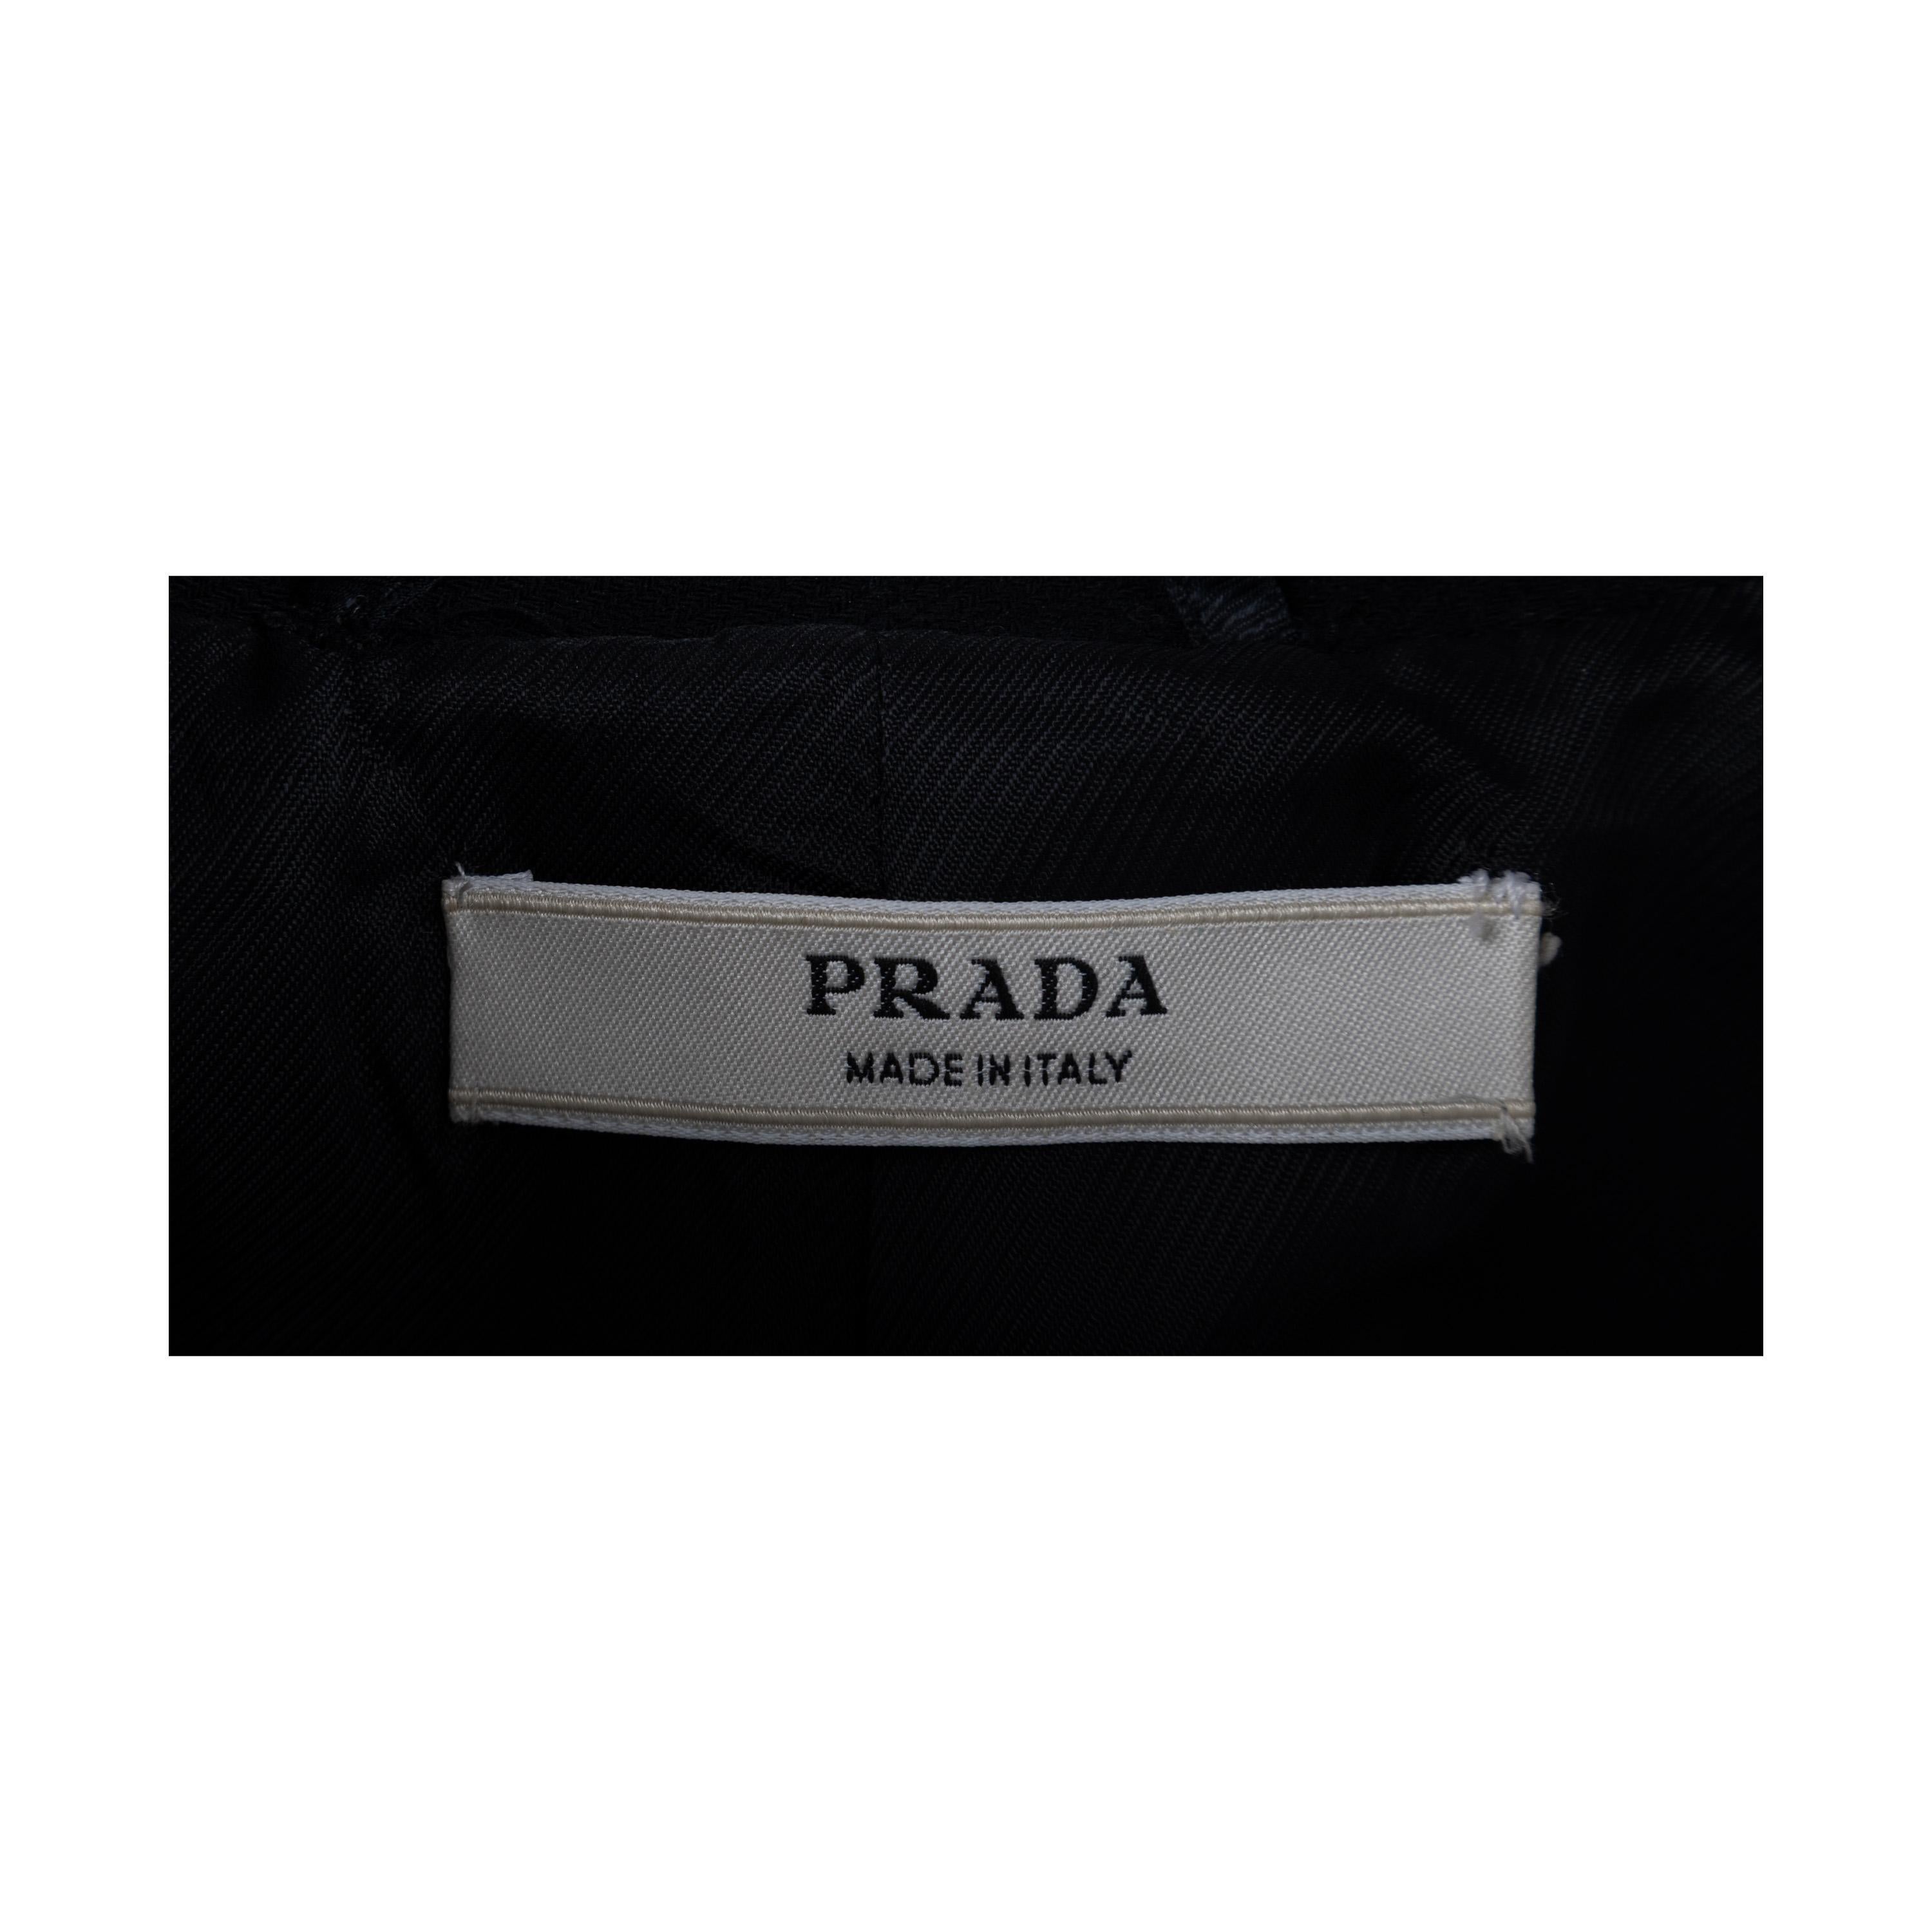 Prada Appliqué Embroidered Wool Coat In Excellent Condition For Sale In Milano, IT